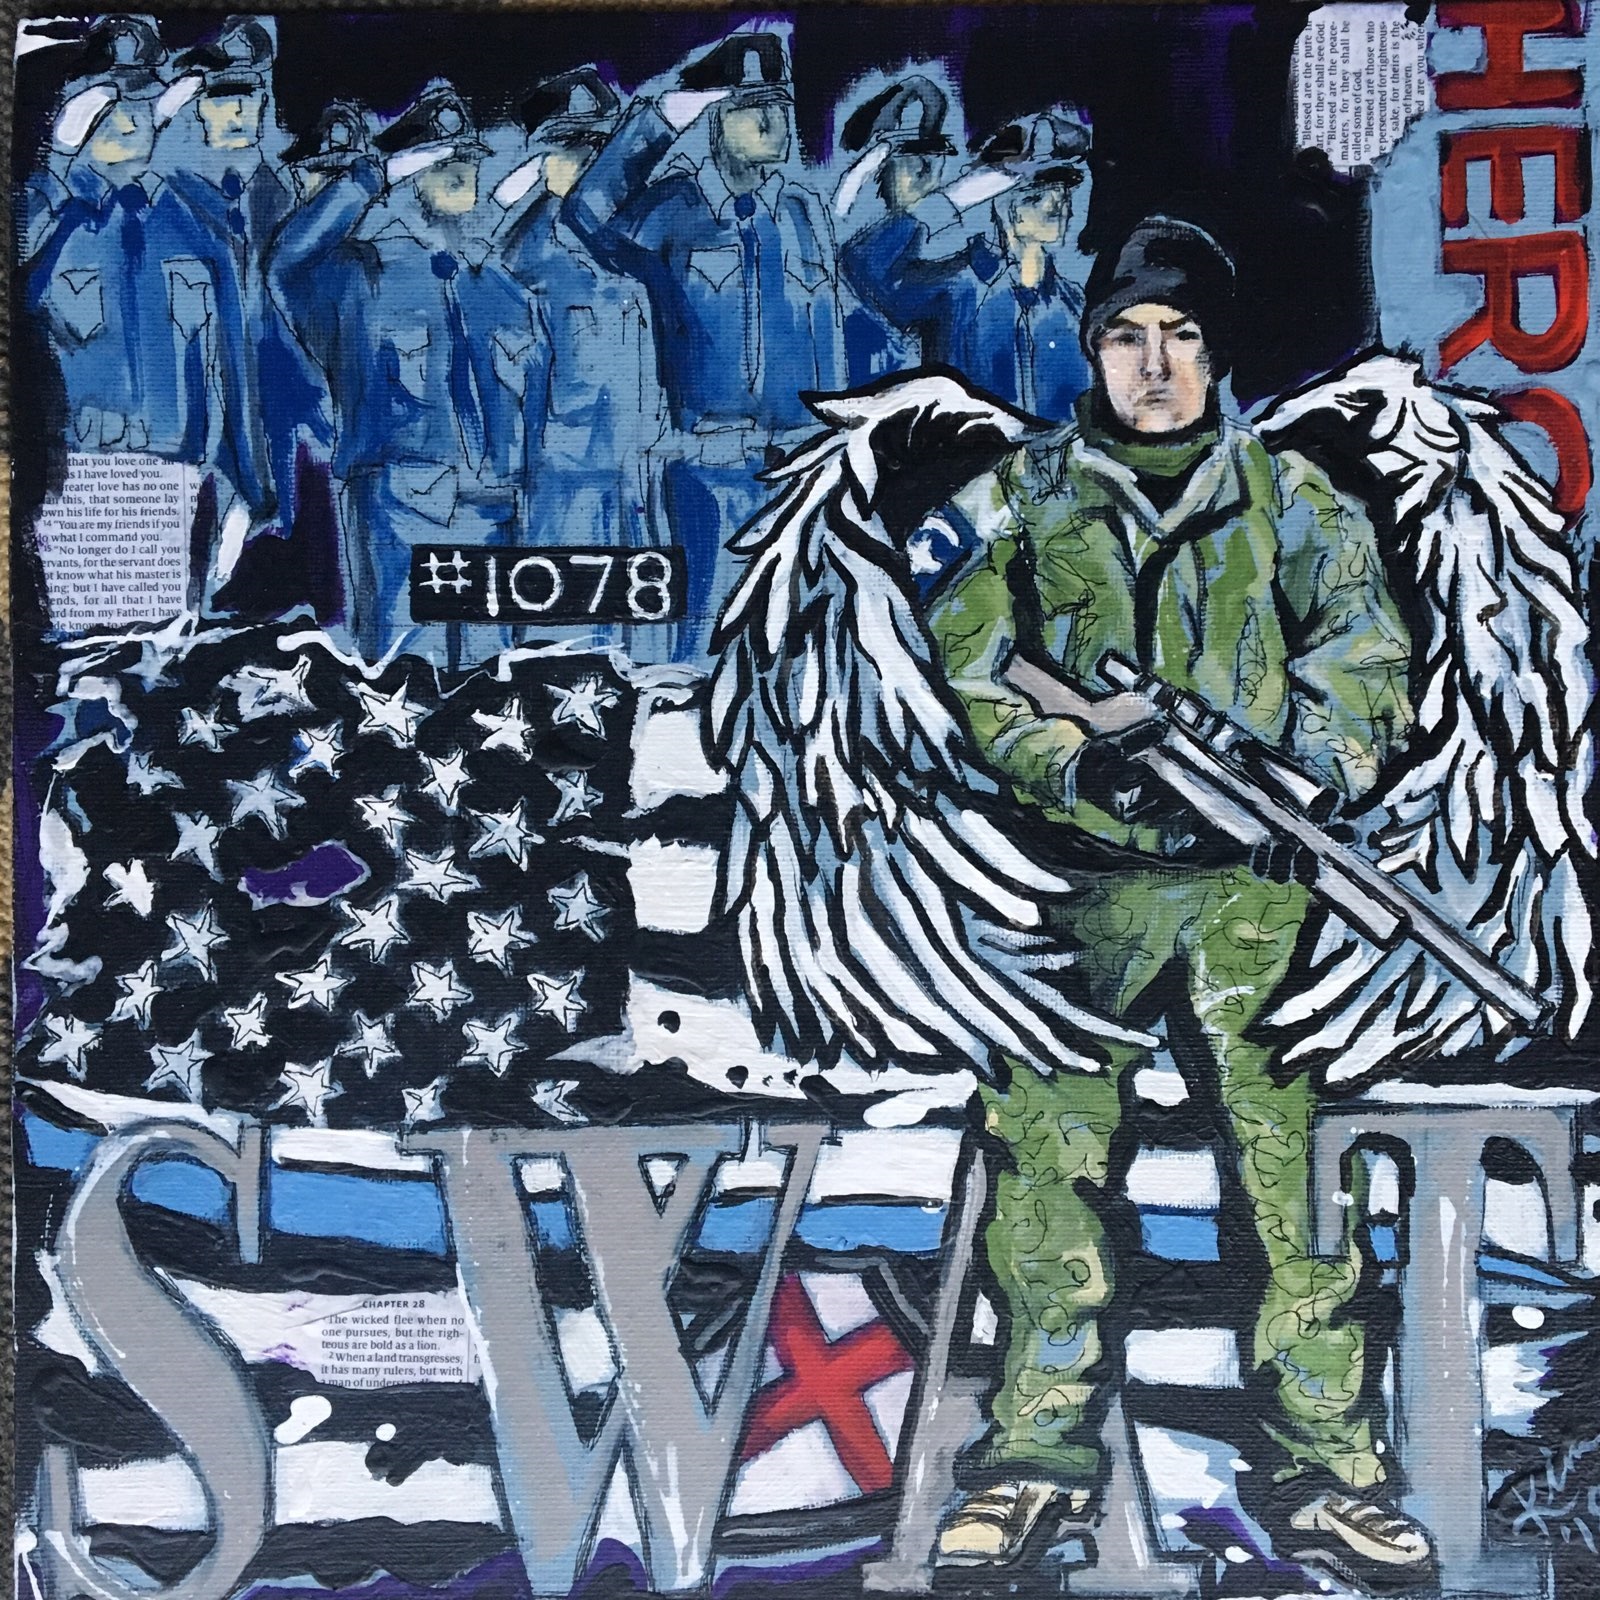 Memorial painting of fallen police officer